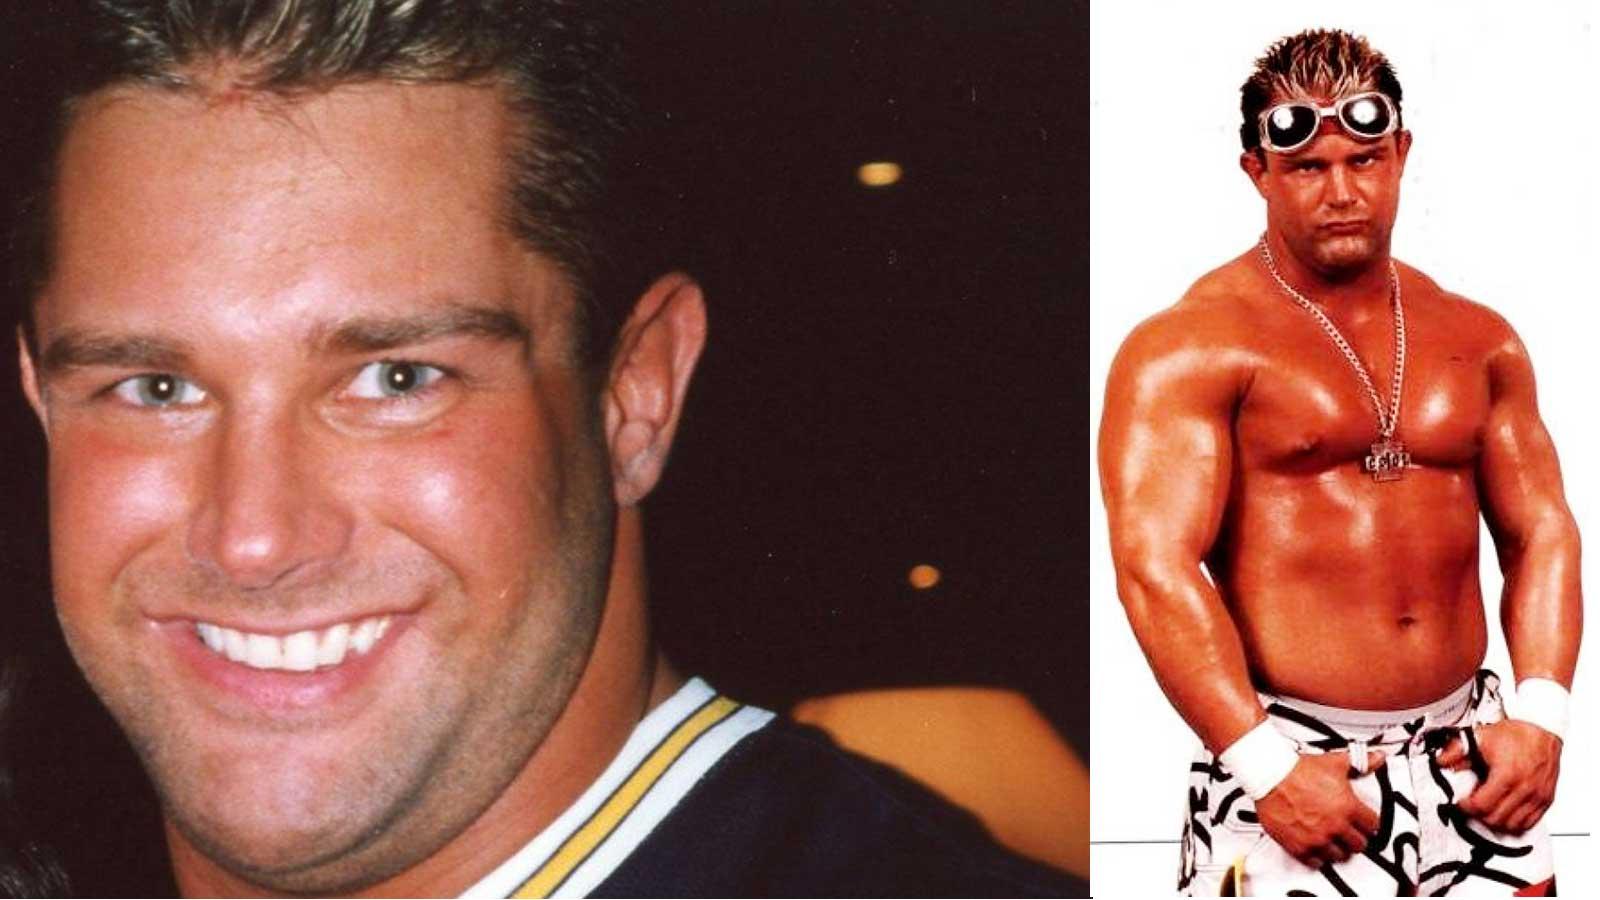 Brian Christopher Lawler